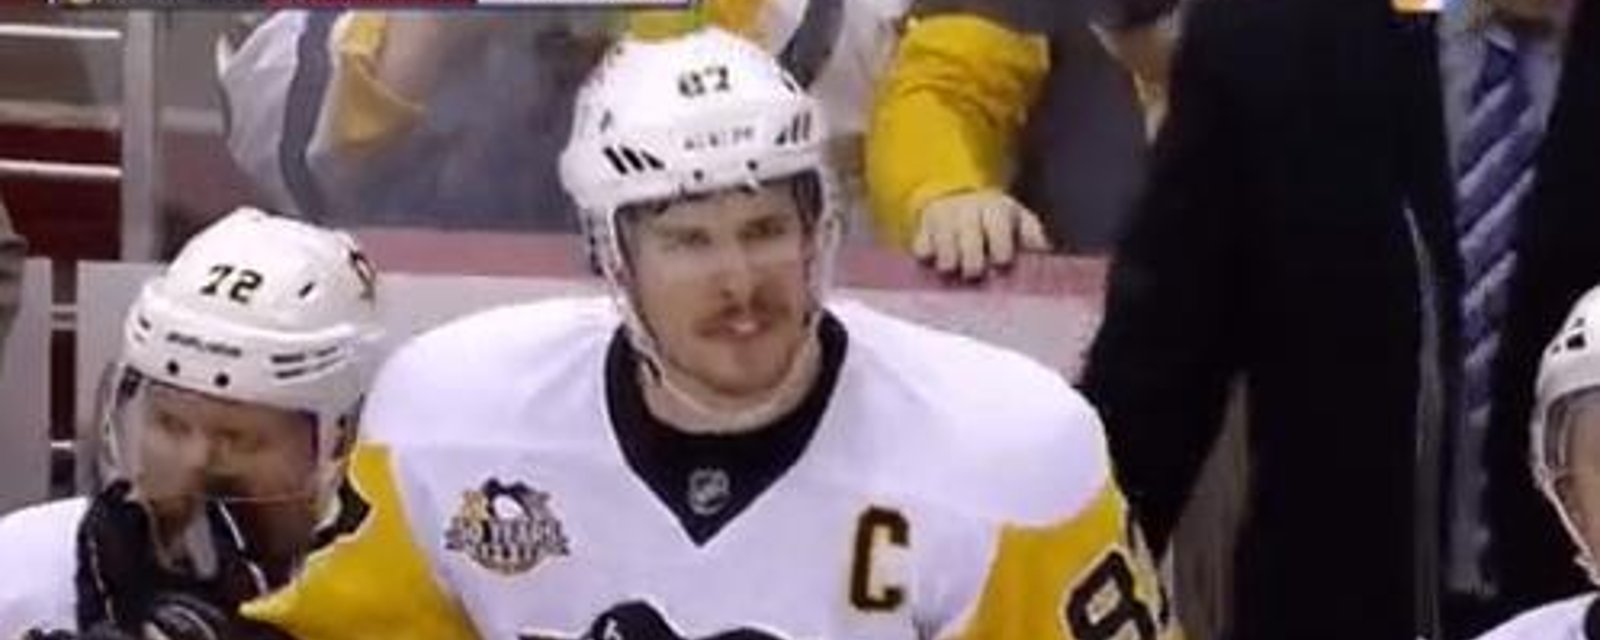 Crosby RAGING following missed call. 